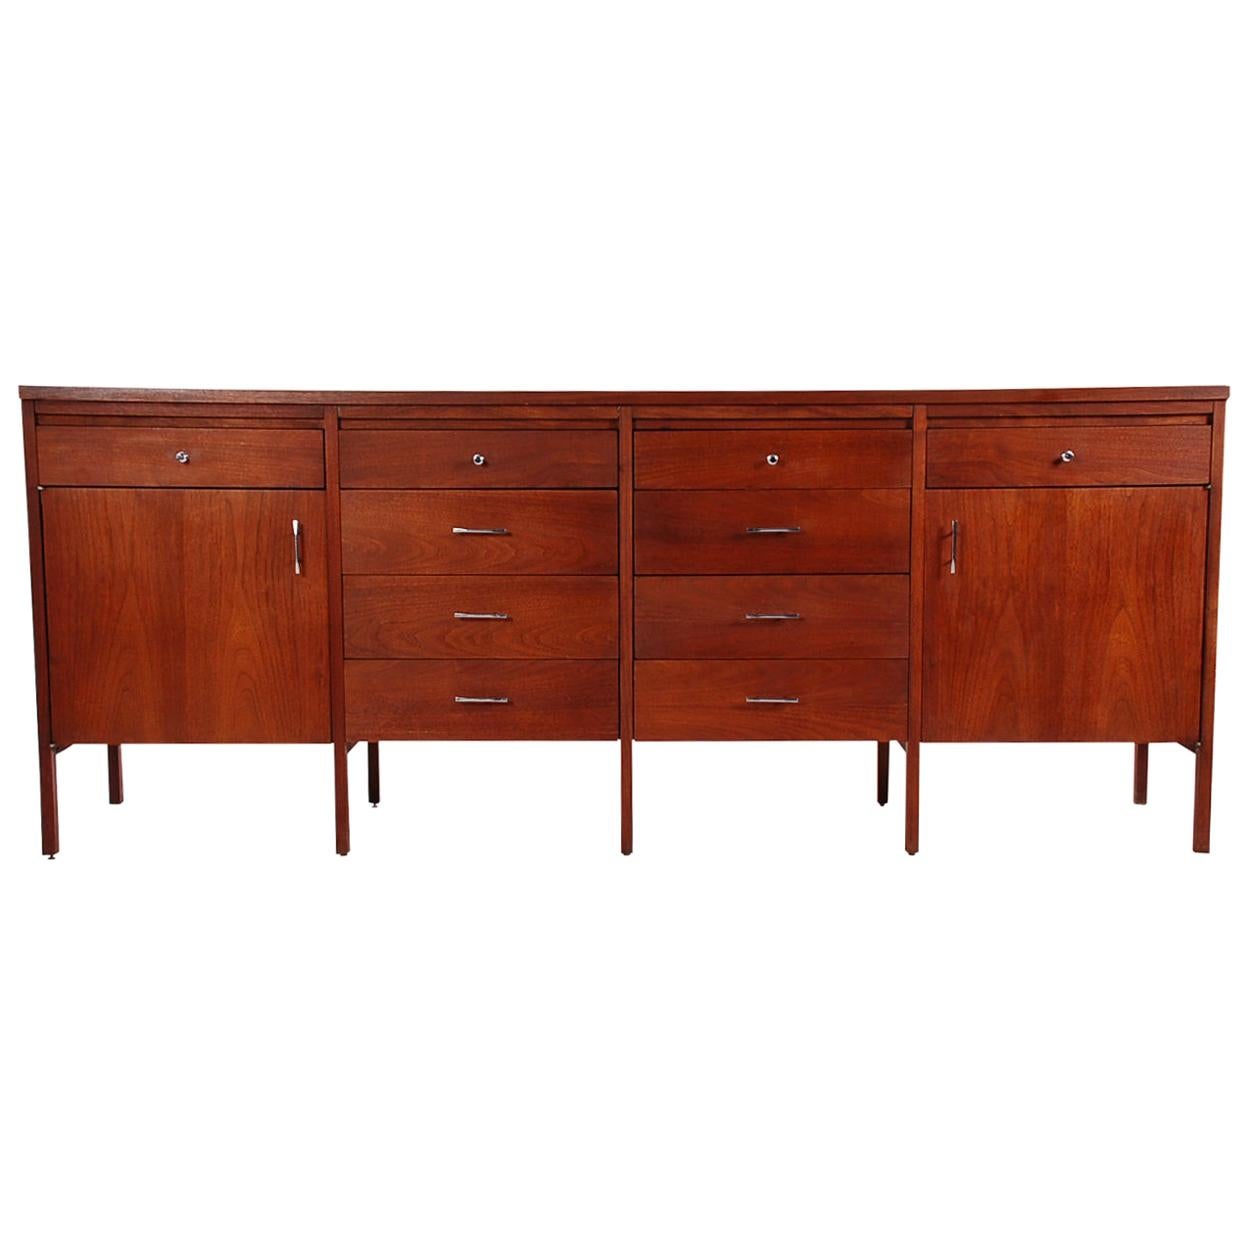 Mid-Century Modern Walnut and Rosewood 8-Legged Credenza or Media Table